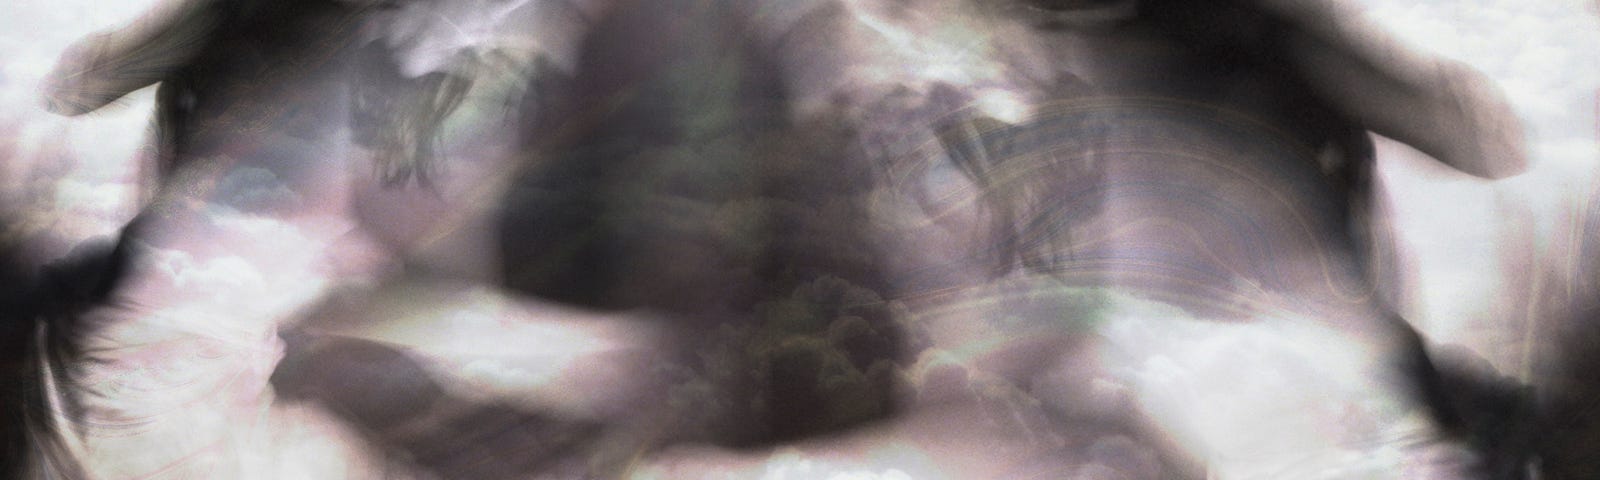 Composite image of a dancing mirrored to herself in a bank of clouds, the palette is in black and white with touches of red hues.